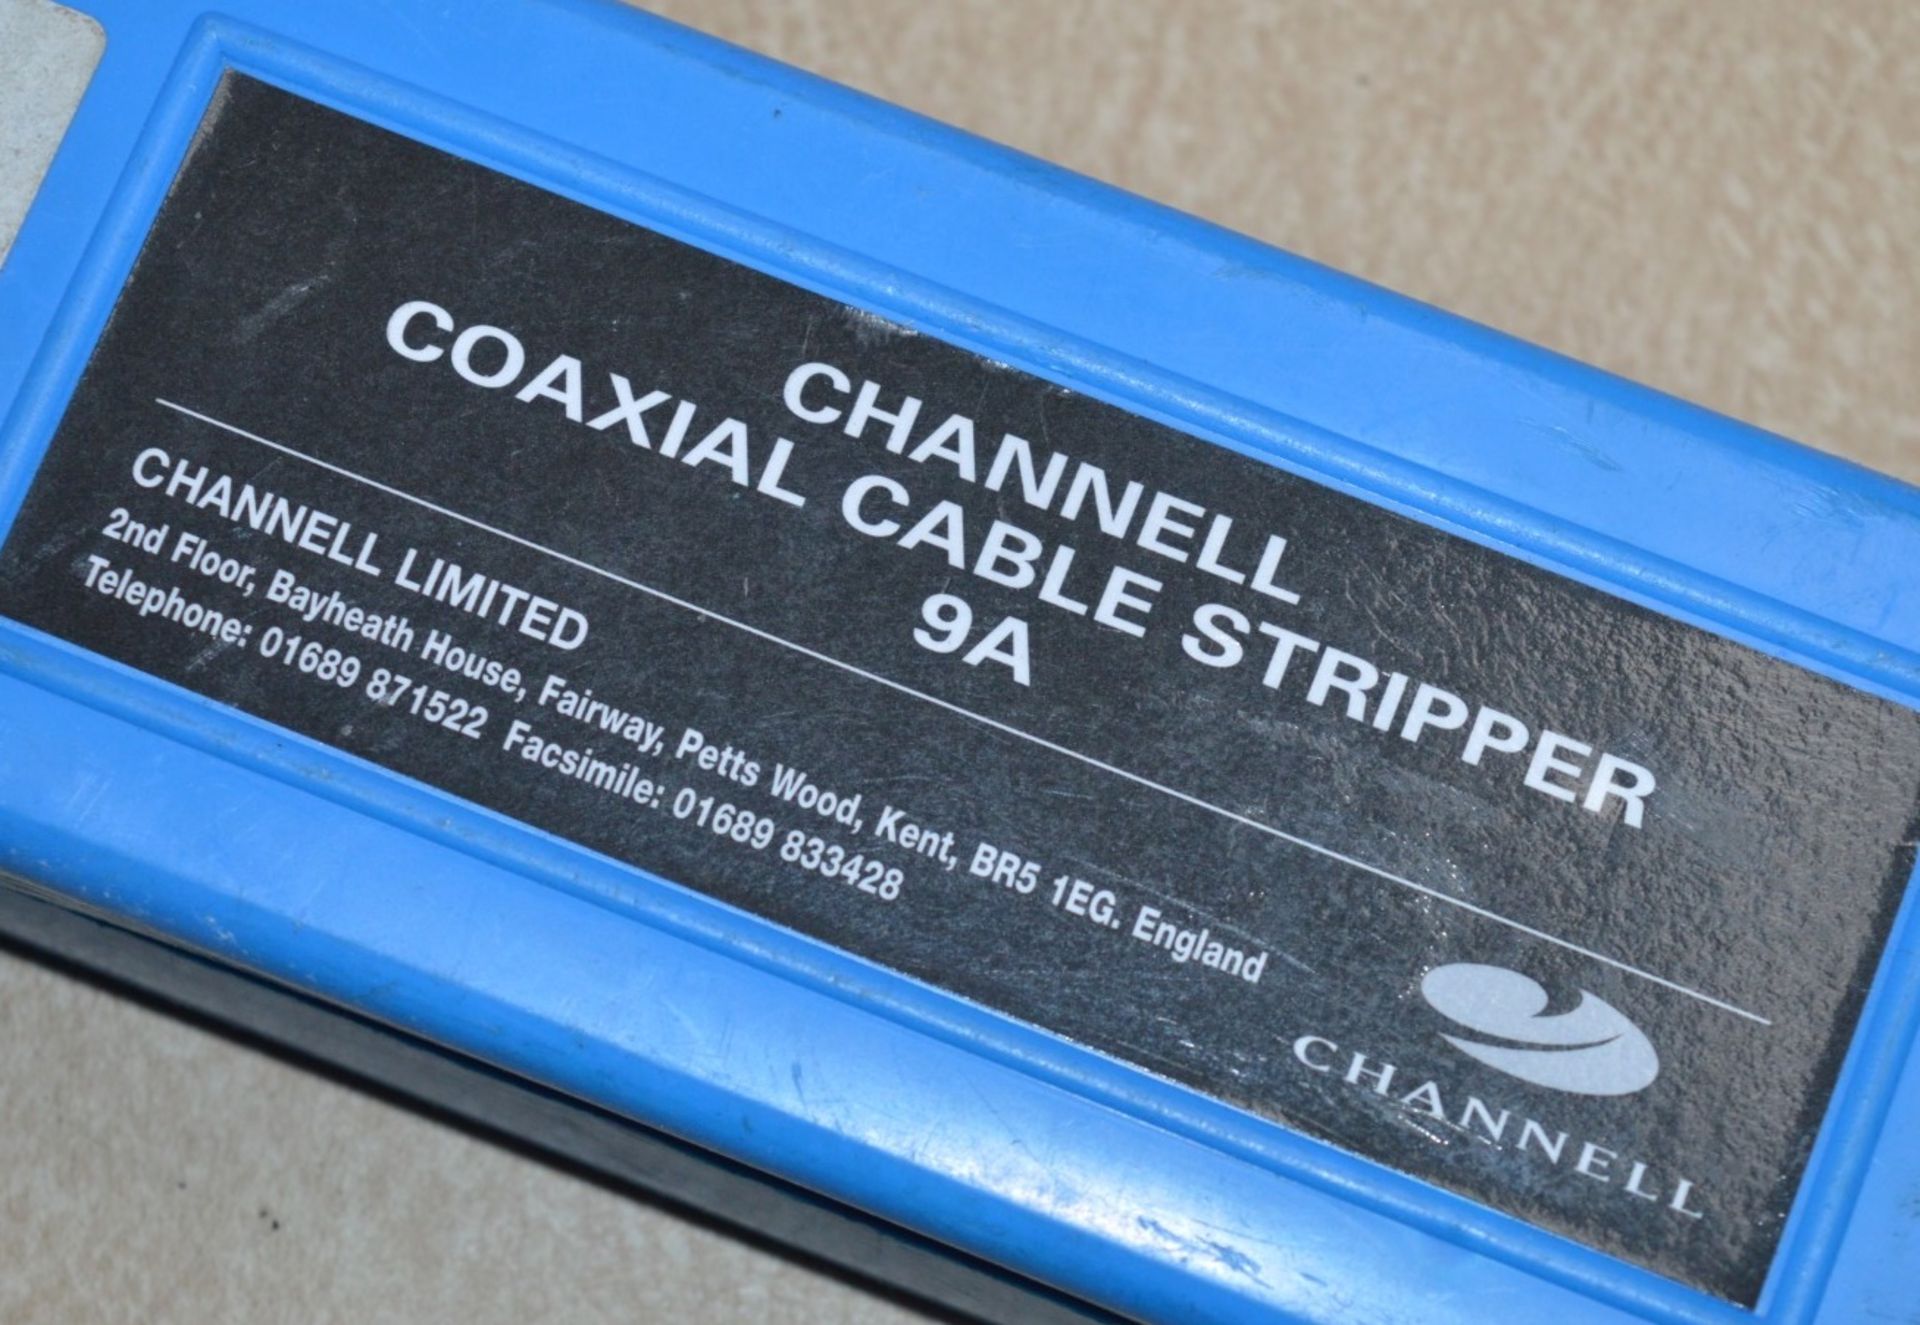 4 x Channell Coaxial Cable Strippers - Model 9A - In Cases With Accessories - CL011 - Ref JP936 - - Bild 6 aus 6